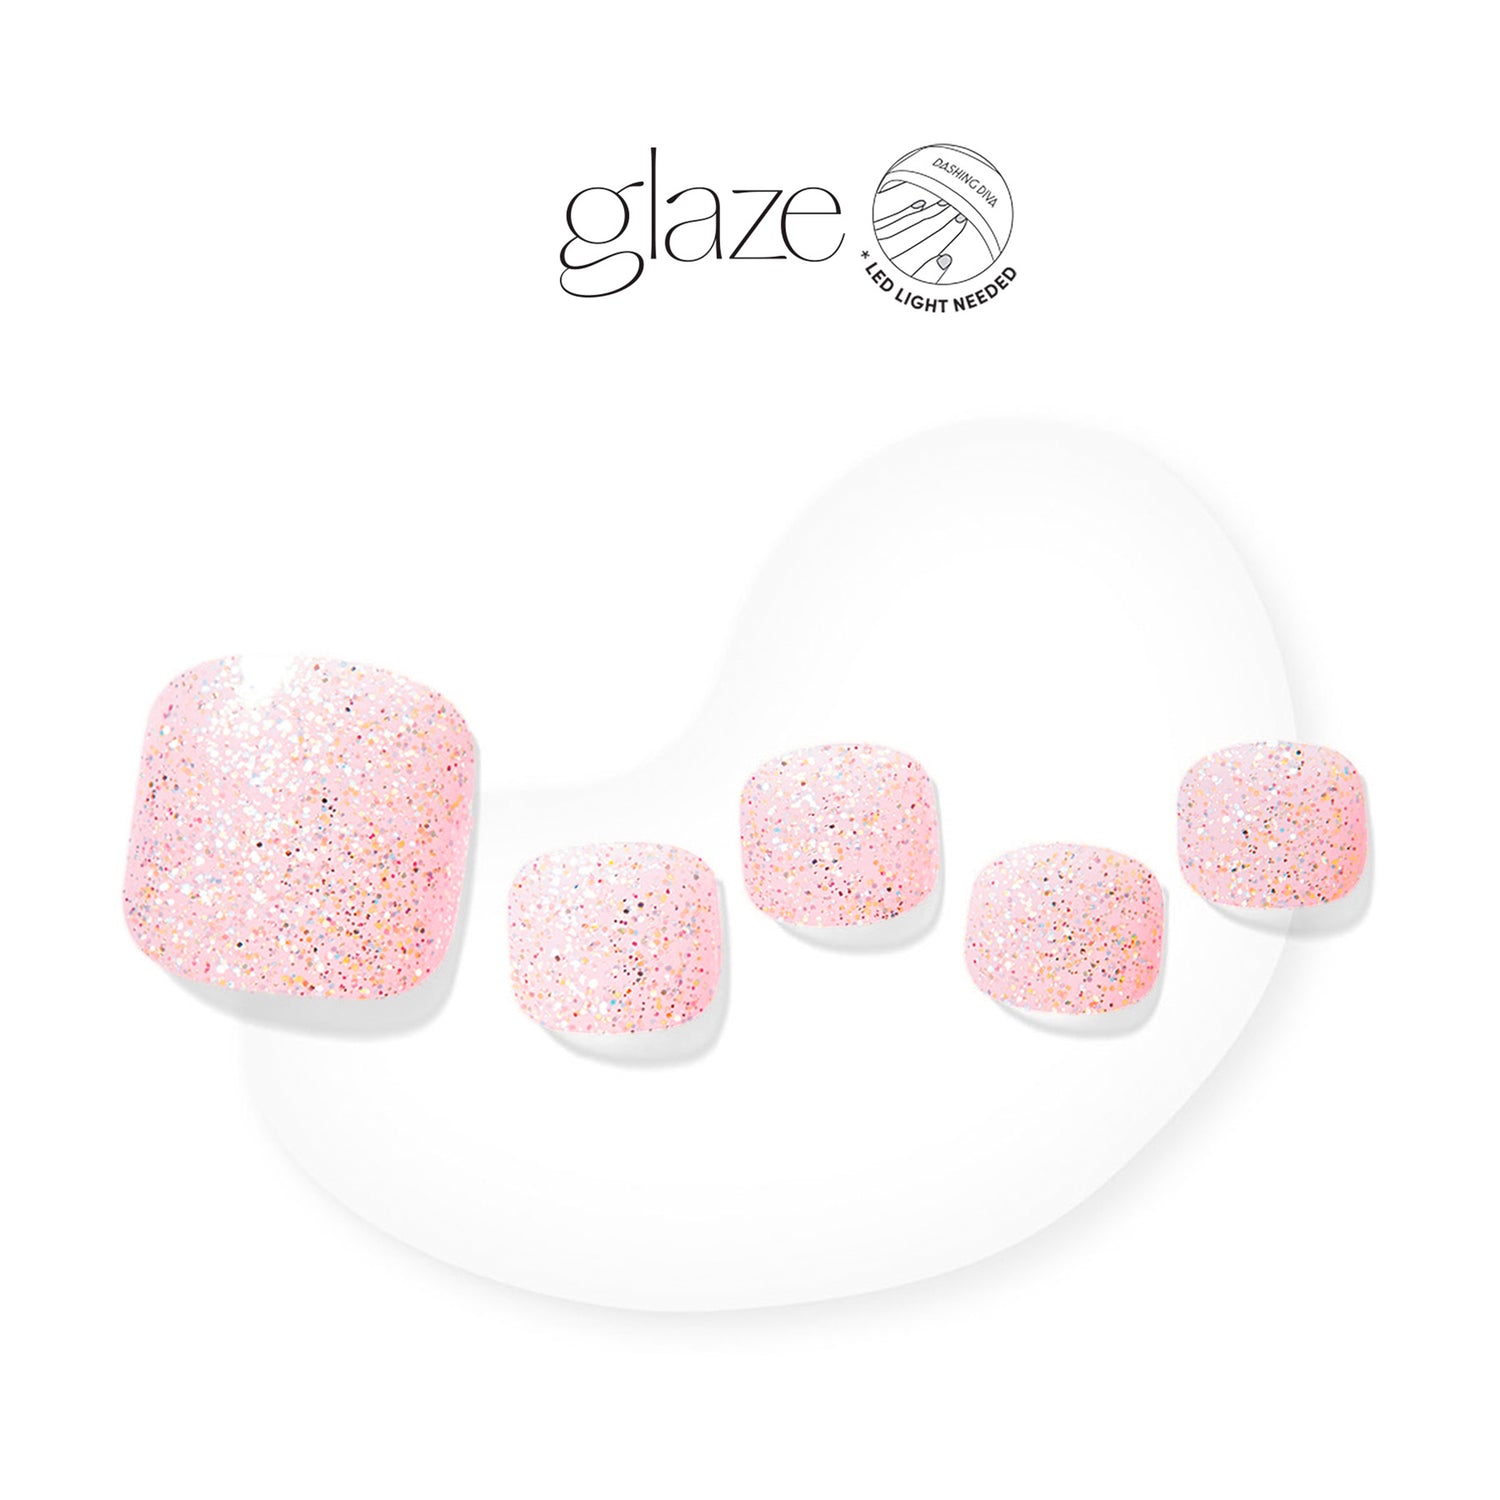 Styled by Jack himself. Semi-cured baby pink gel pedicure strips featuring iridescent glitter with mega volume &amp; maximum shine.